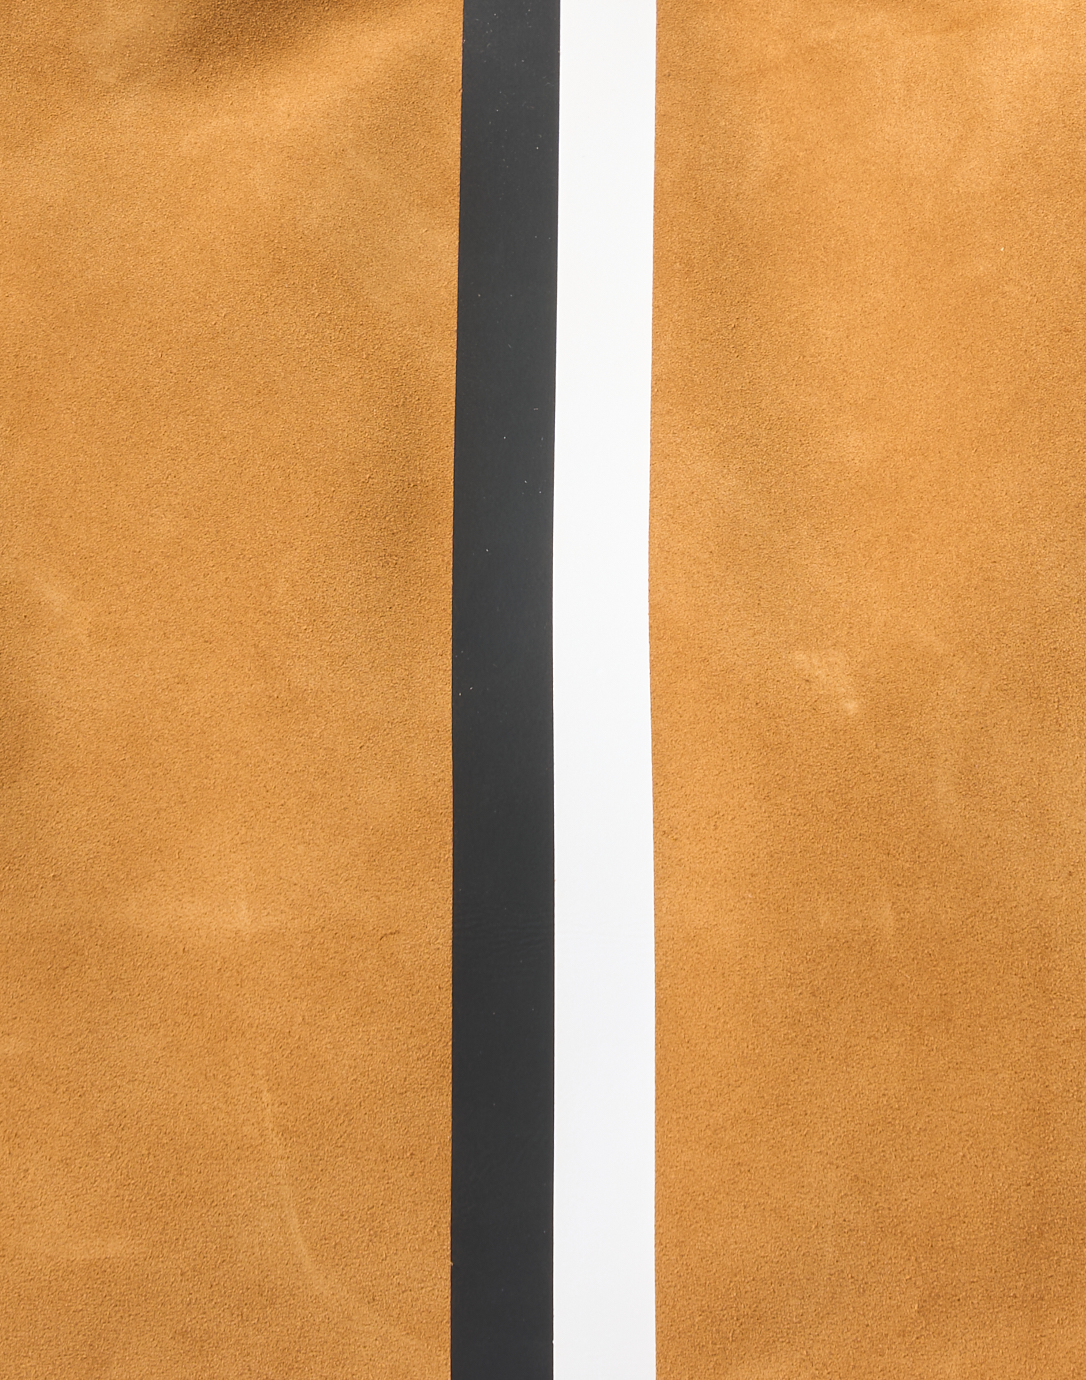 Clare V. Simple Tote Camel Suede with Black & White Stripes